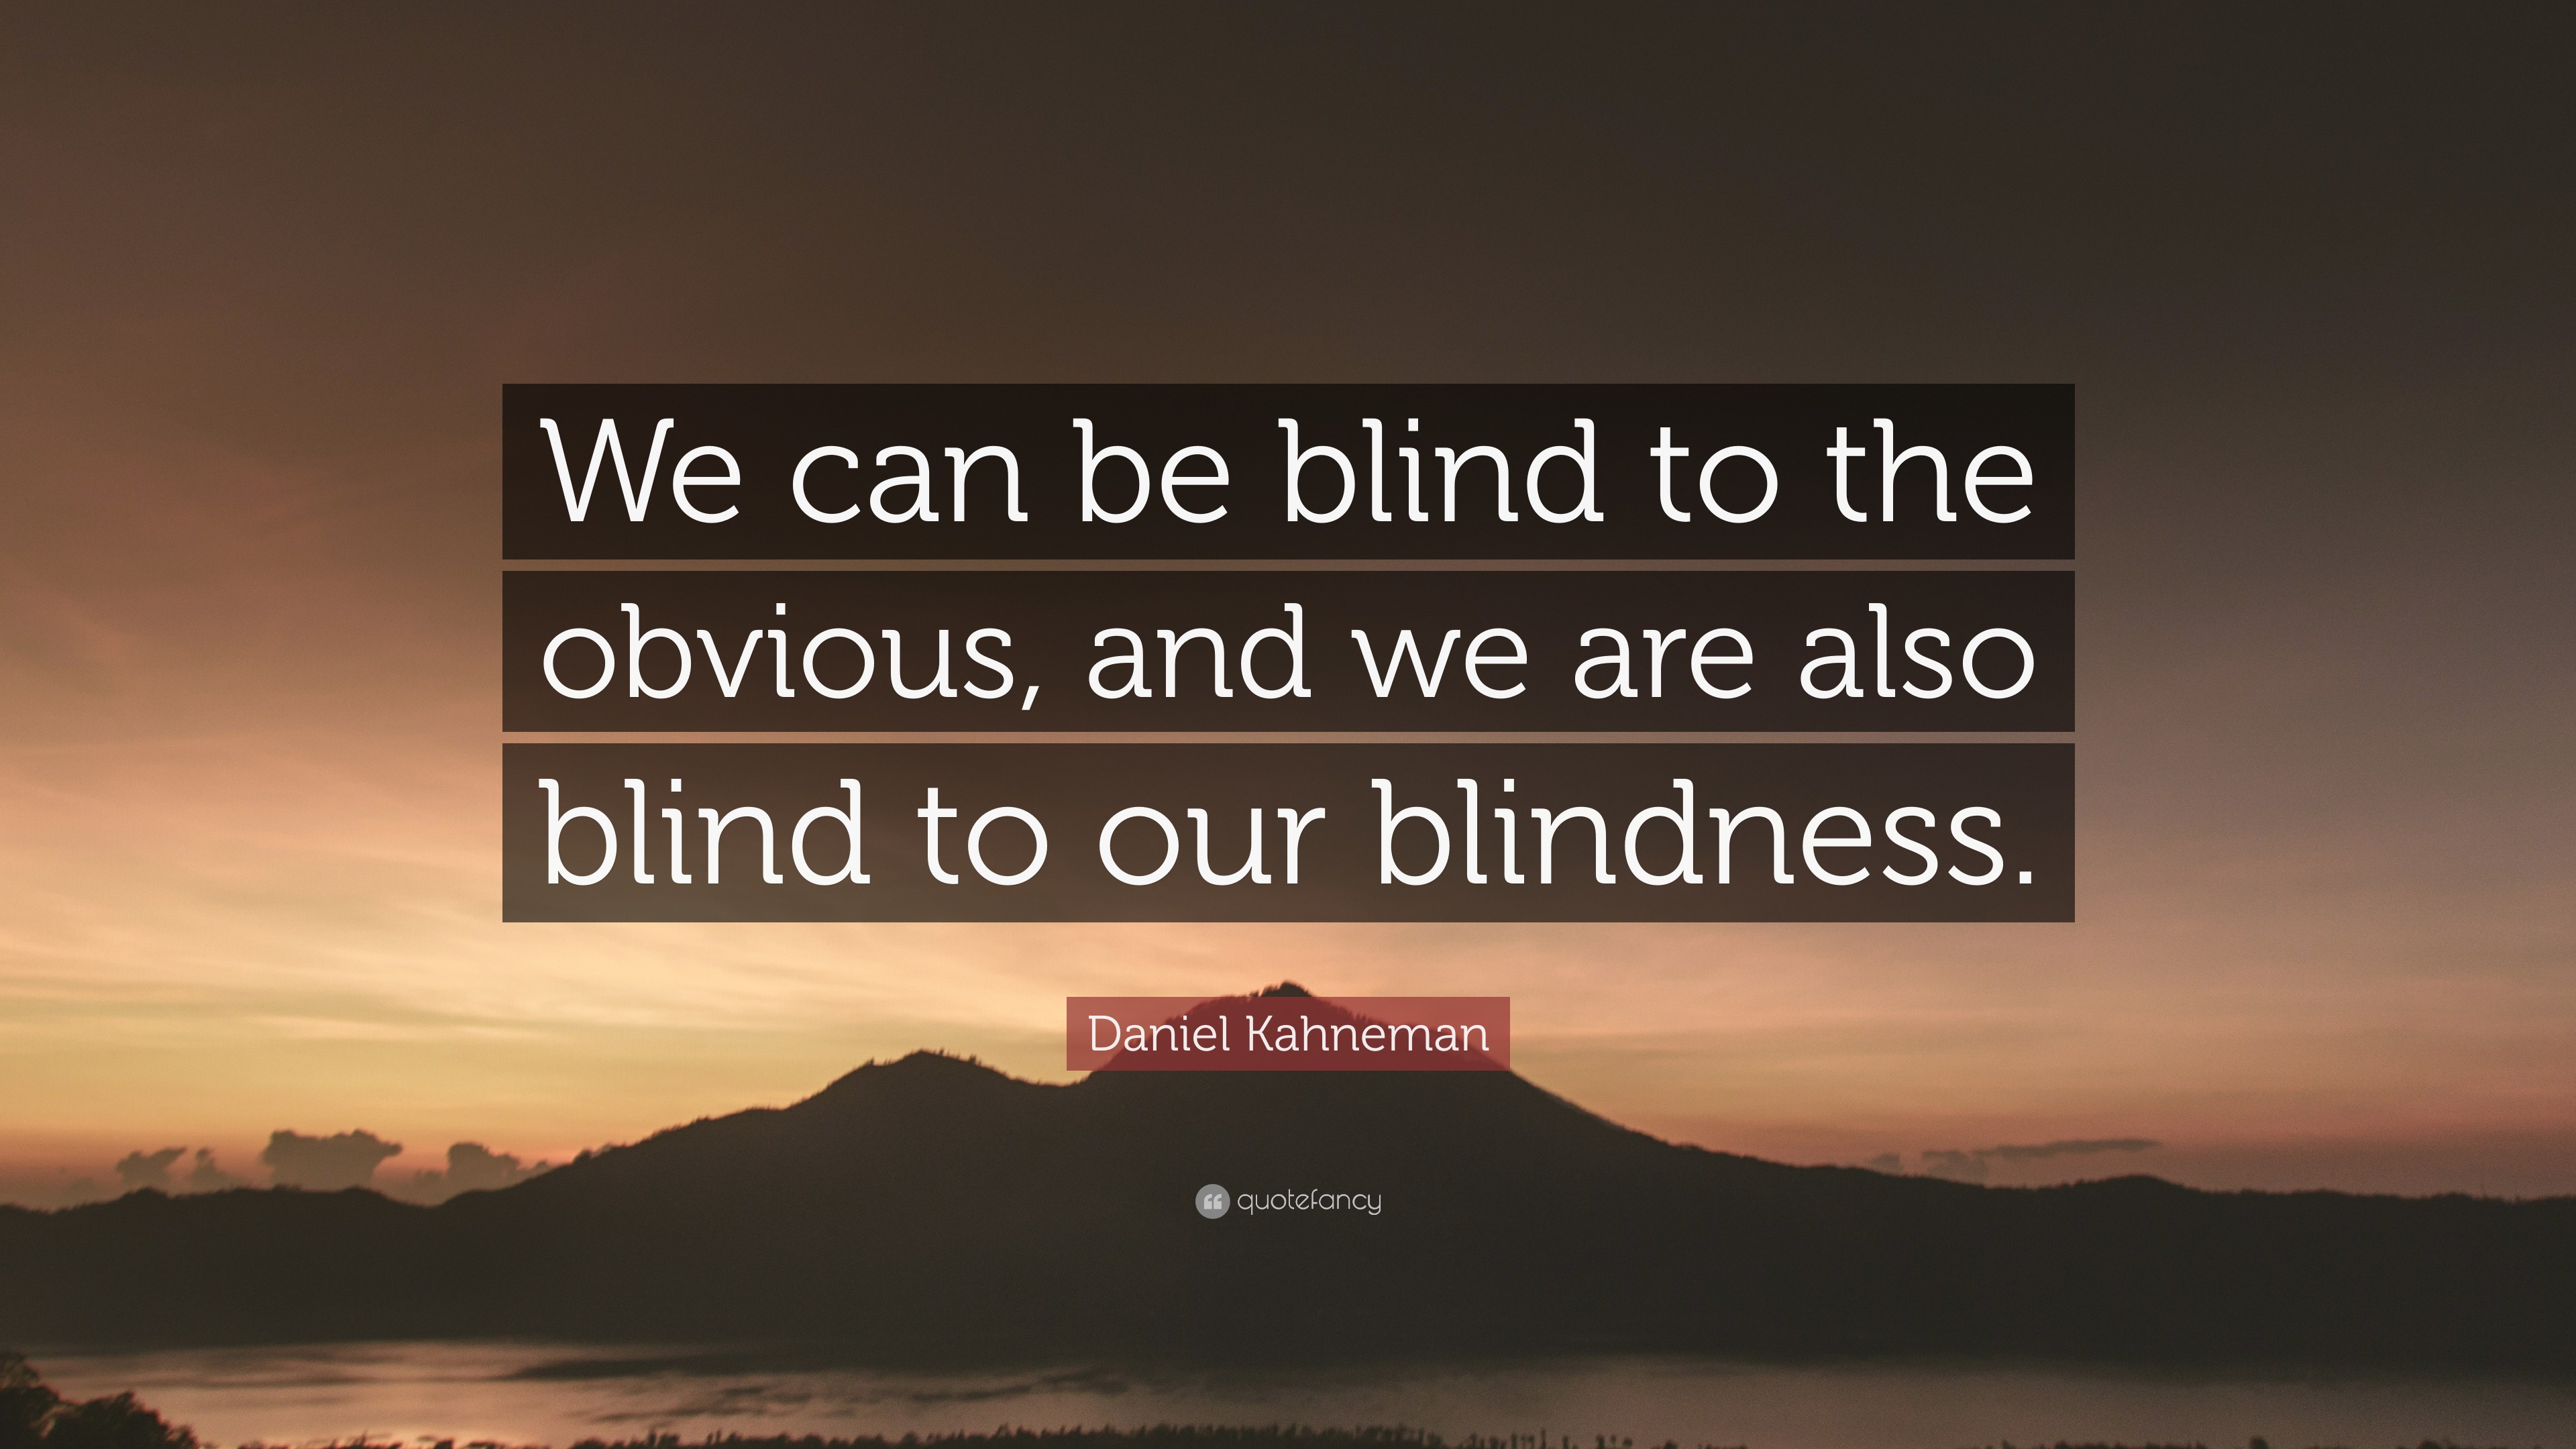 Daniel Kahneman Quote: “We can be blind to the obvious, and we are also